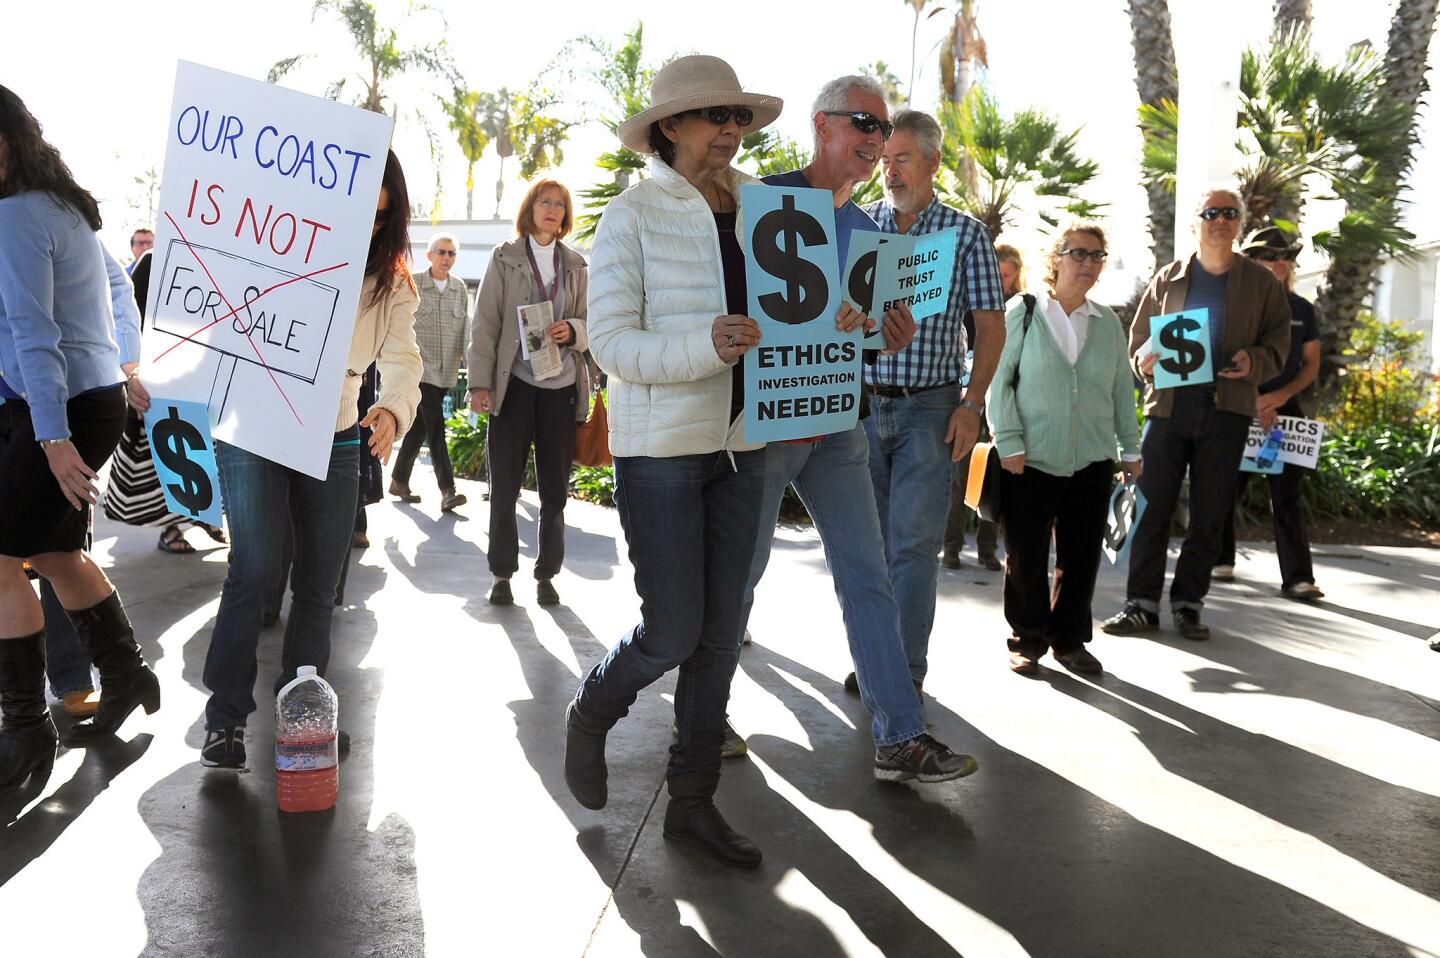 People gather outside the Santa Monica Civic Auditorium for a press conference held by a coalition of community leaders from Venice and activists before the first California Coastal Commission hearing since the firing of Executive Director Charles Lester.